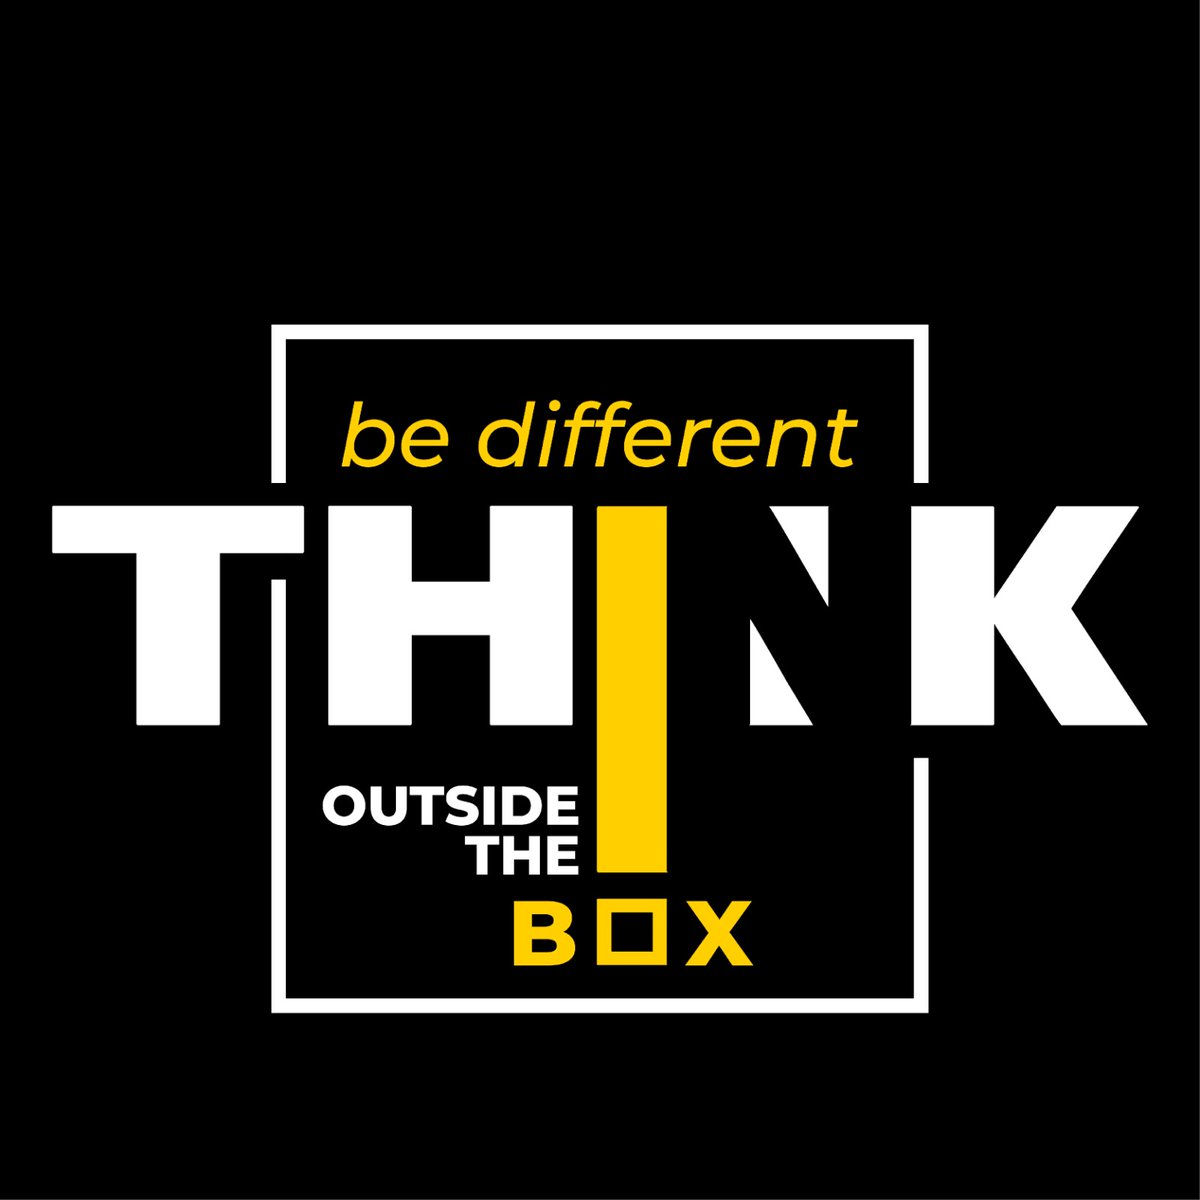 ONEmust always be different.
#newpost #postoftheday #explorepage #achive #motivate #inspire #bediffrent #outside #thinkbig #growthmindset #makeithappen #followme #eswarigroup #ceo #twitter